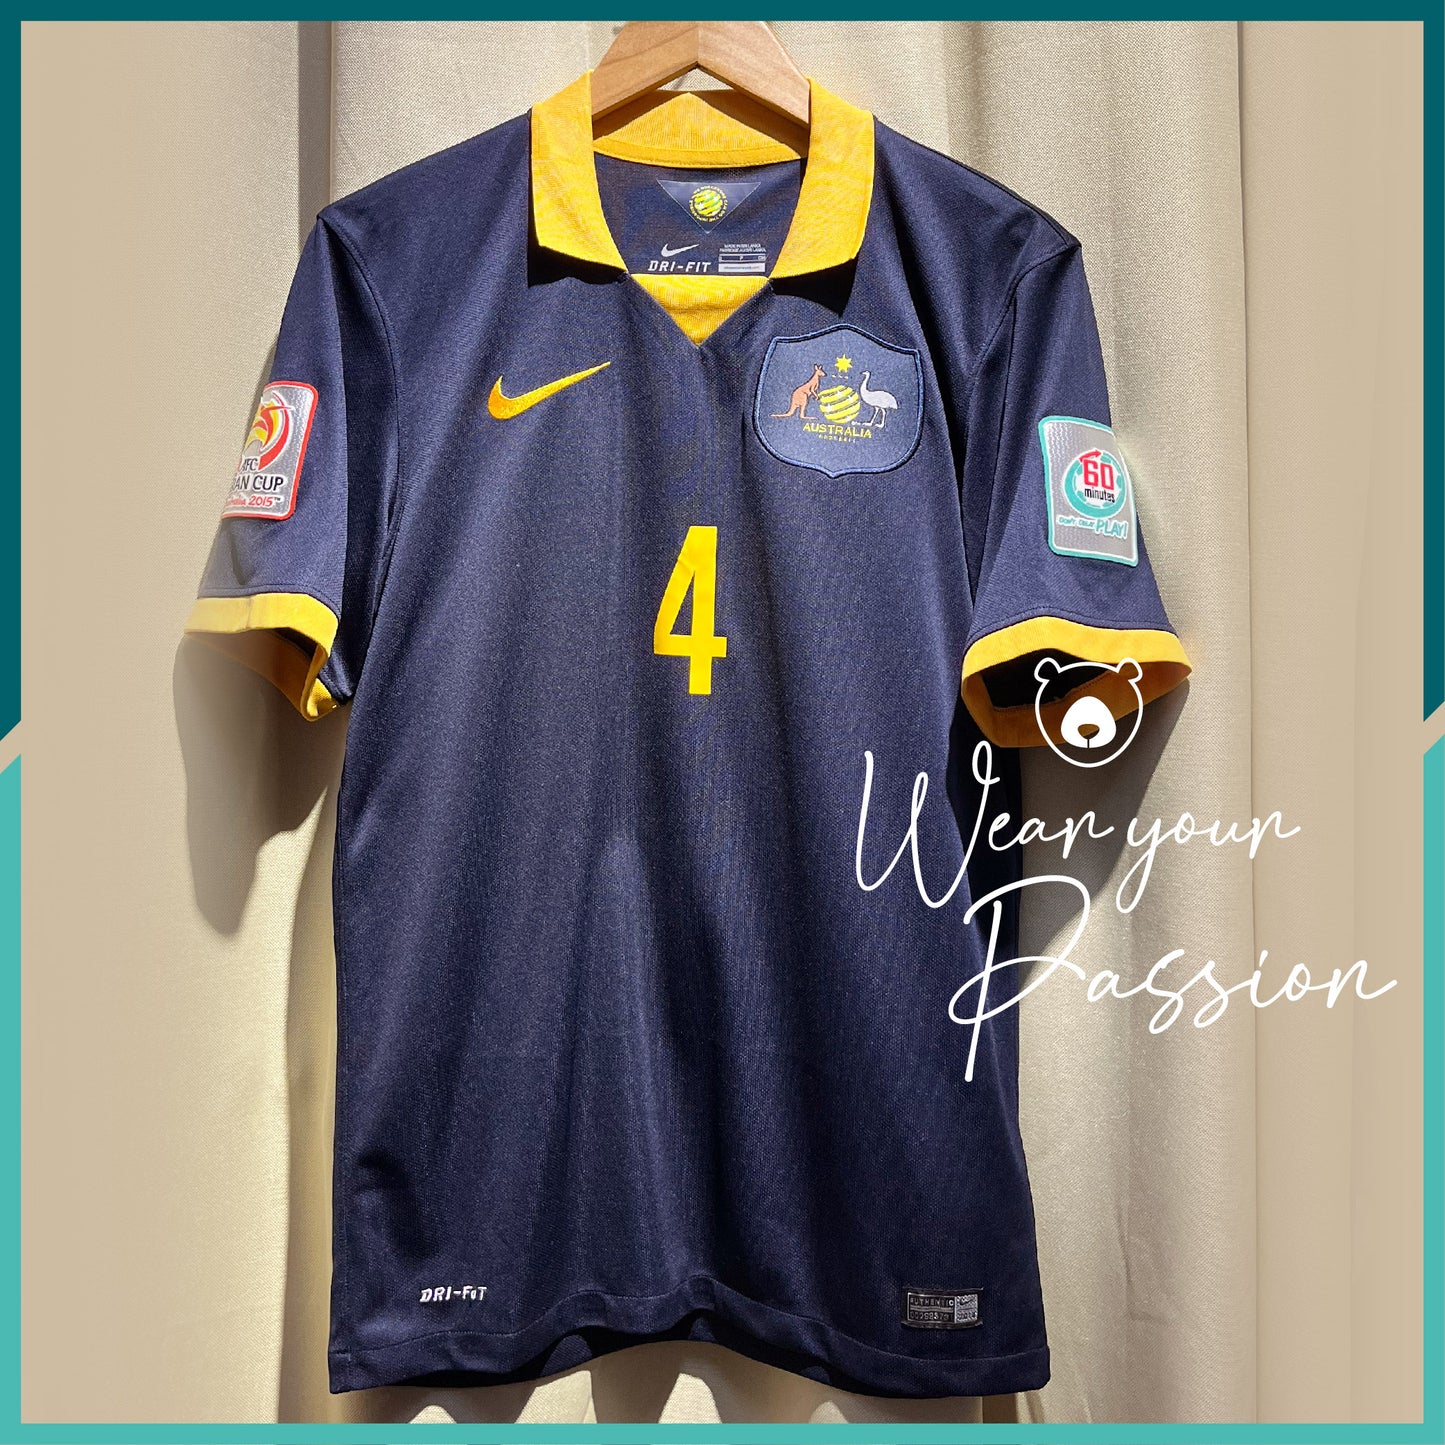 [Nameset & Patches Included] 2014-15 Australia Away Jersey